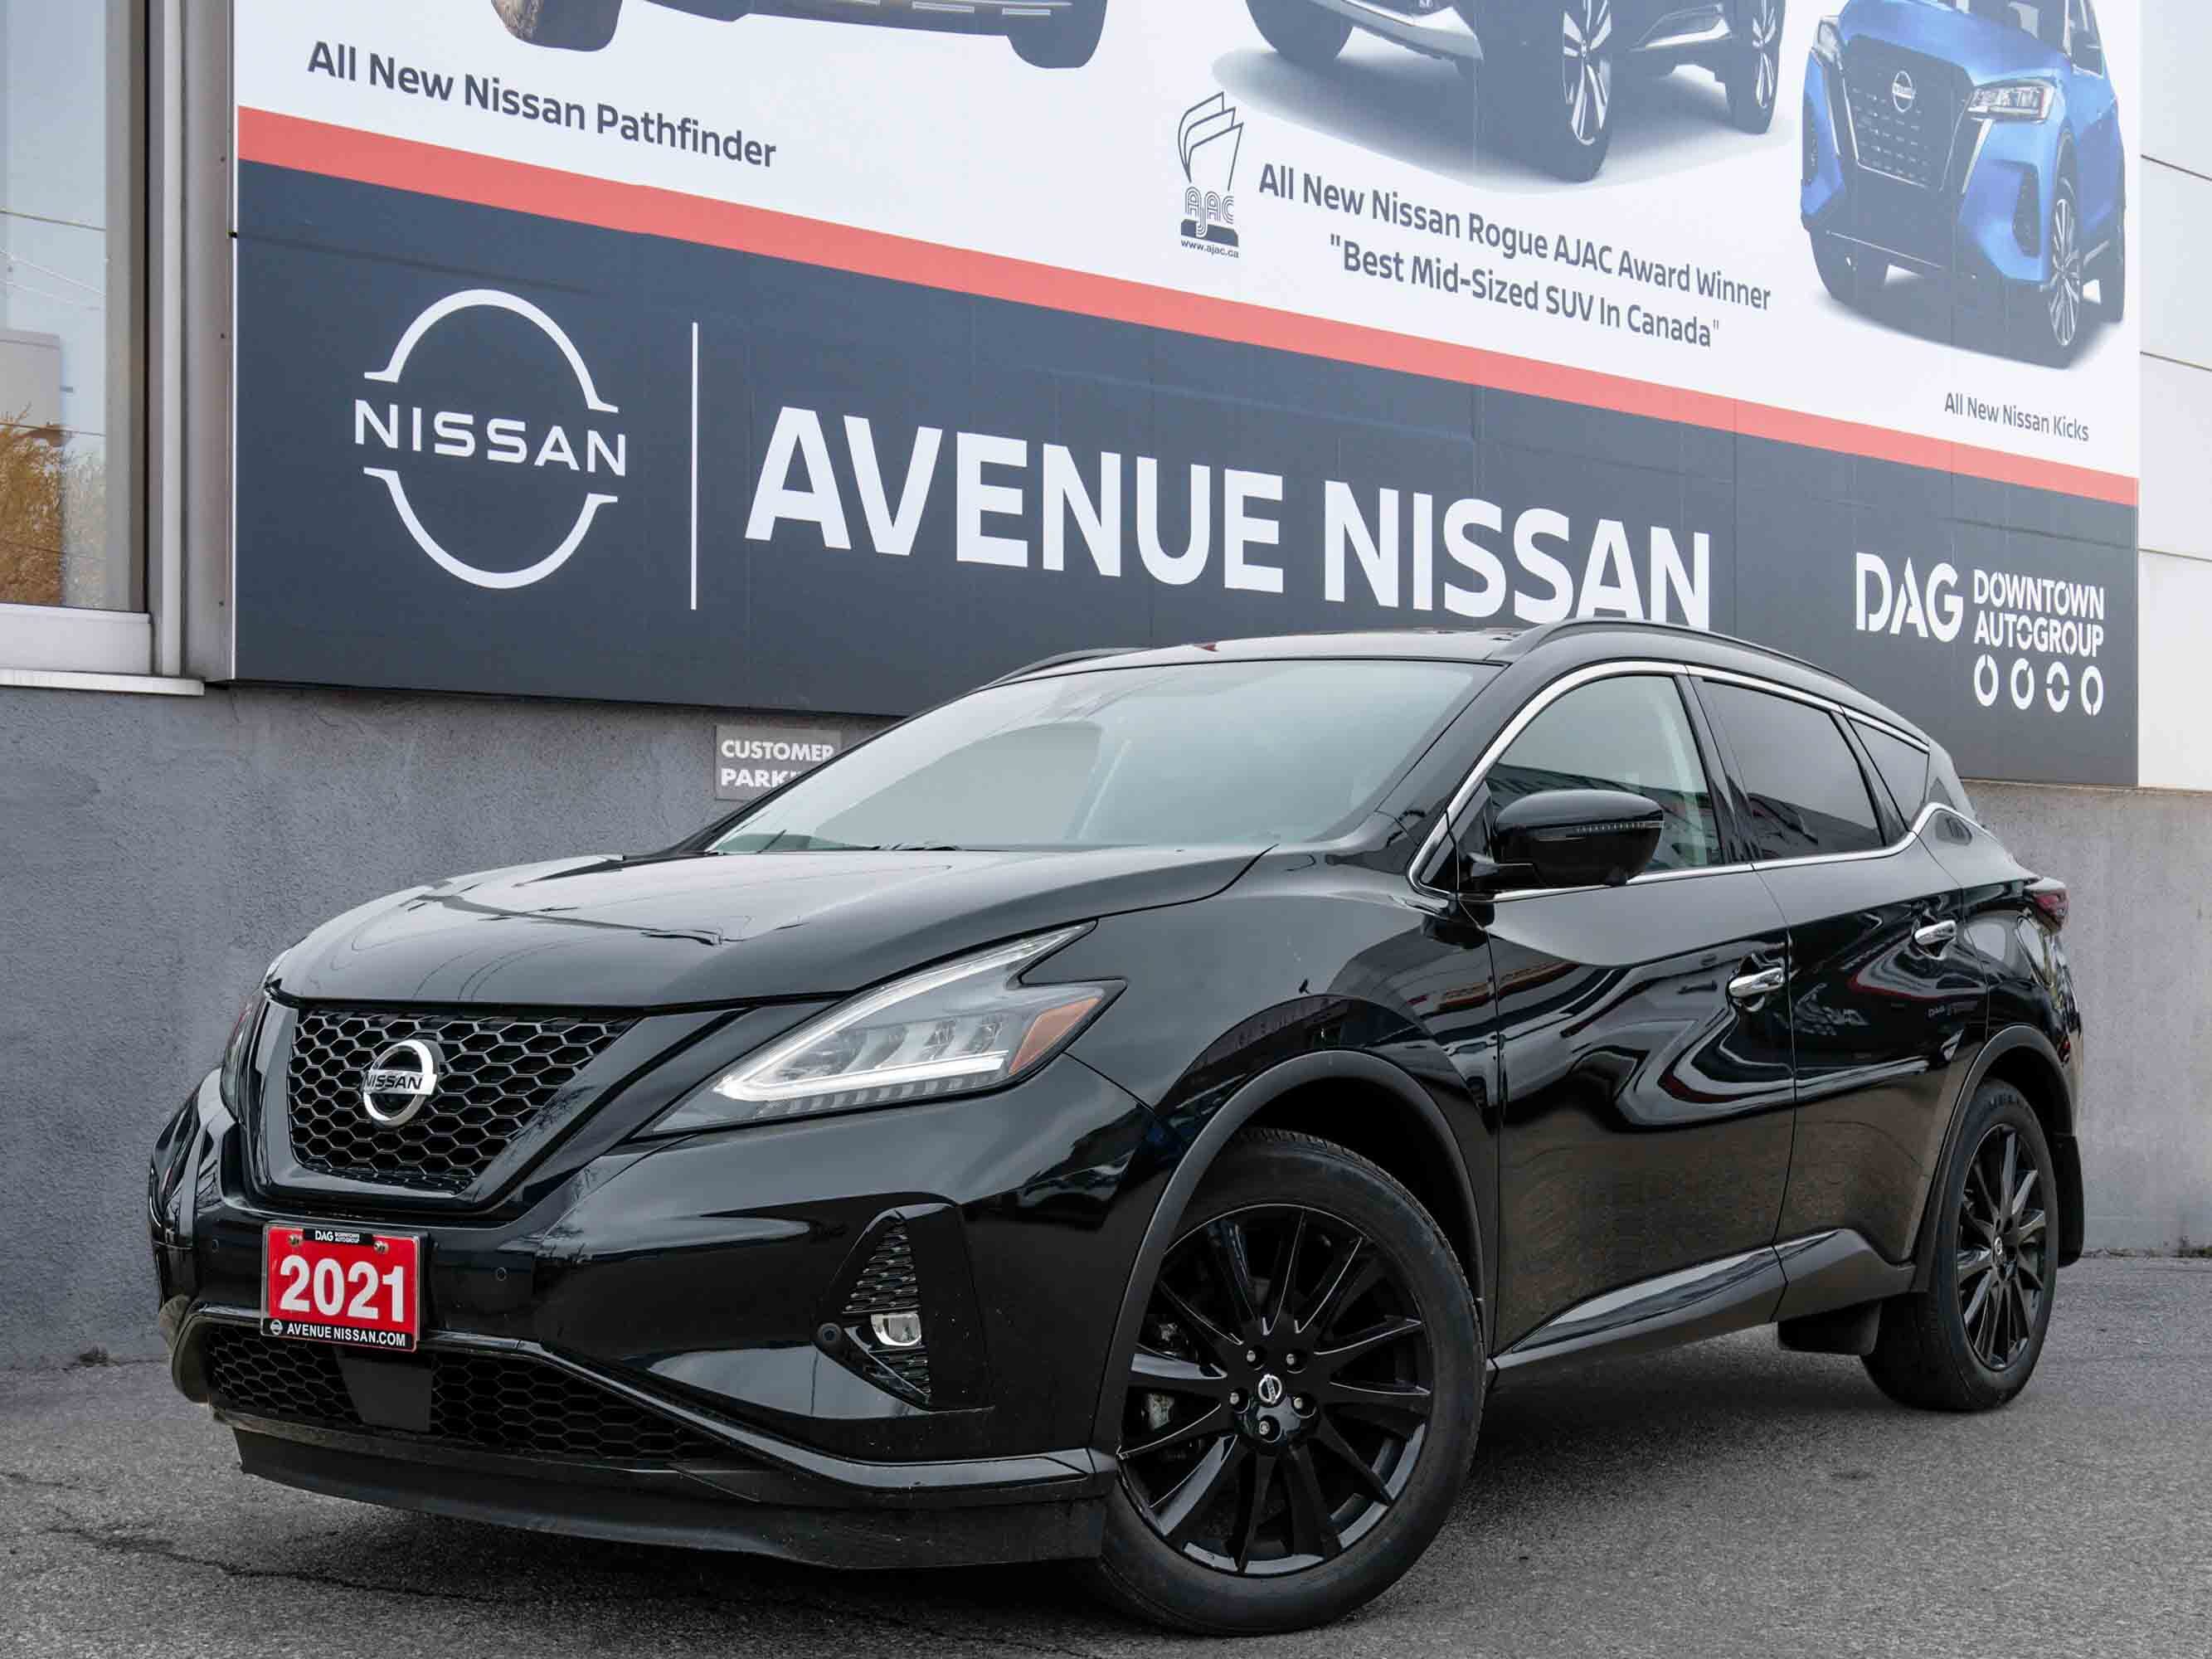 2021 Nissan Murano LOW KM'S, ACCIDENT FREE, LEATHER, PANO ROOF, CPO!!